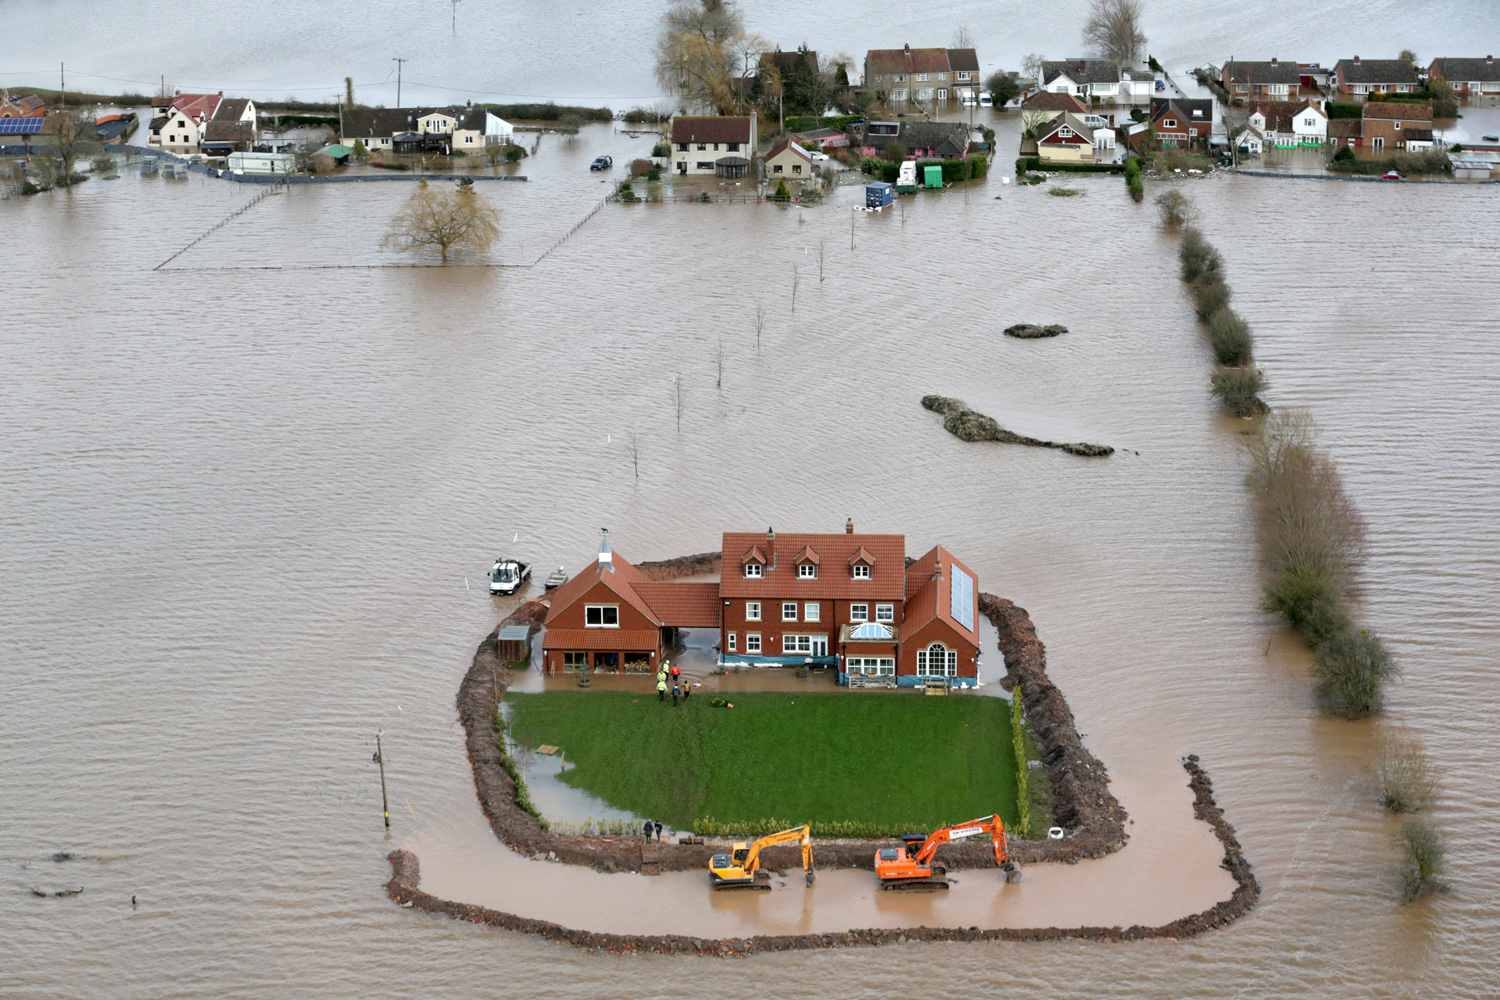 Feb. 10, 2014. Worker's continue to build flood defense around Moorland resident Sam Notaro's house in the flooded village of Moorland near Bridgwater on the Somerset Levels in Somerset, England.